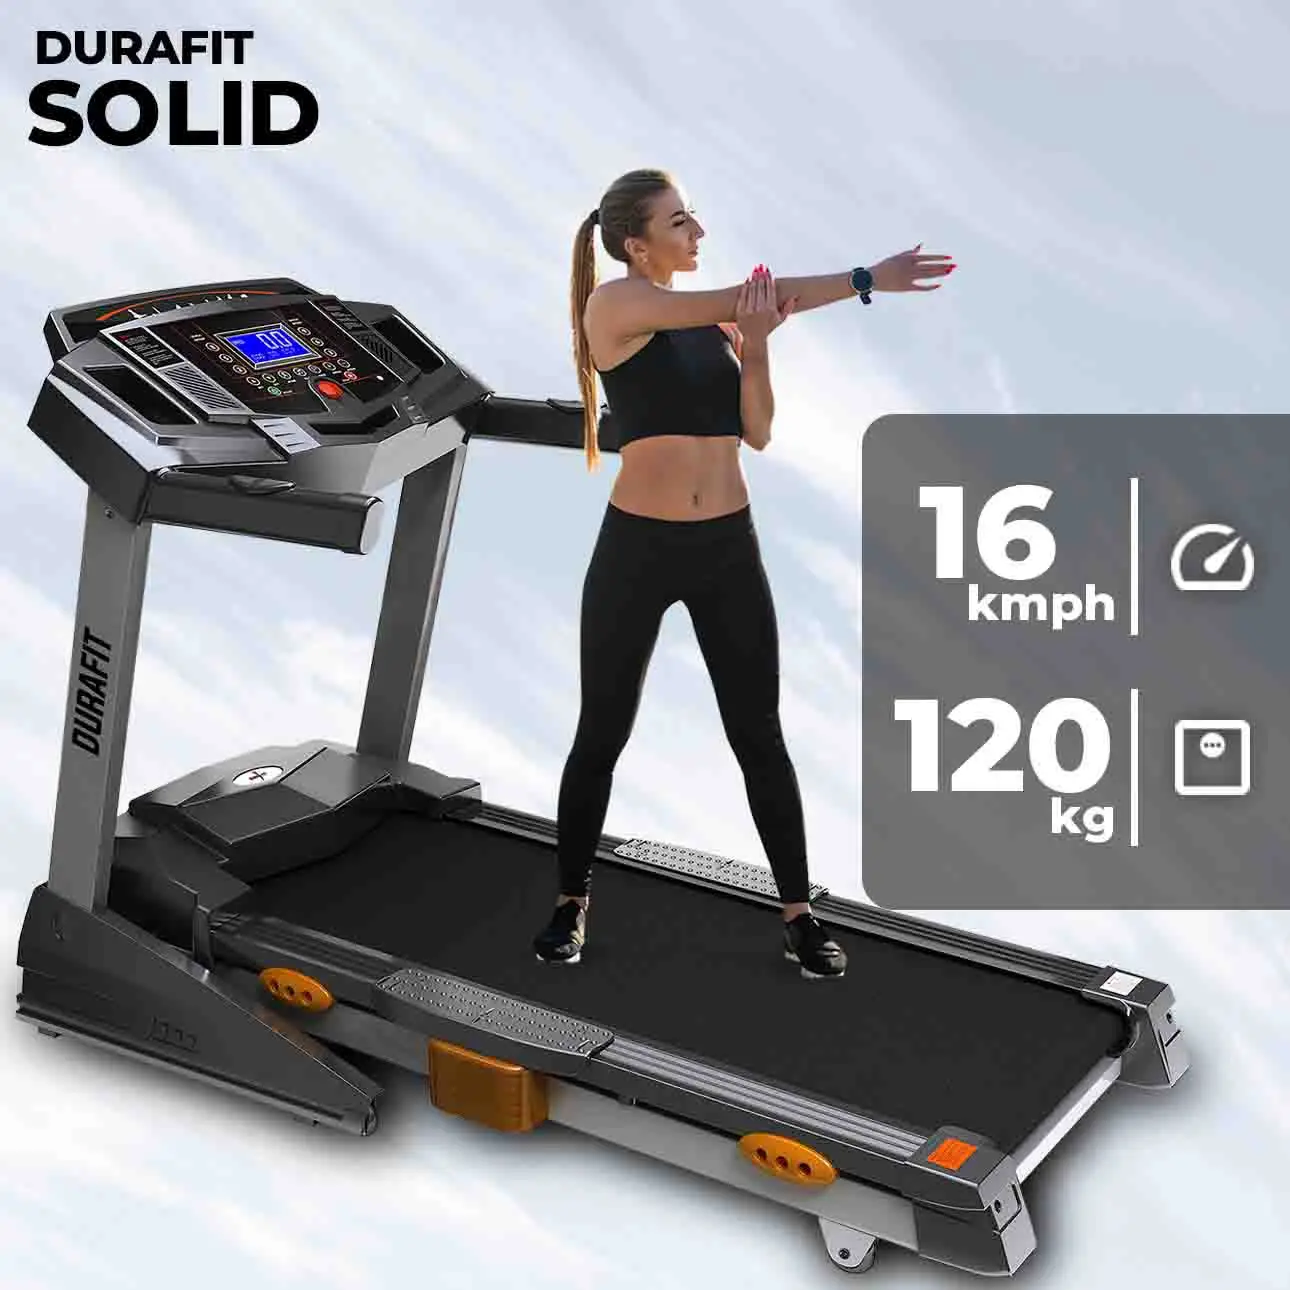 Durafit Solid Treadmill with Max Speed of 120kg